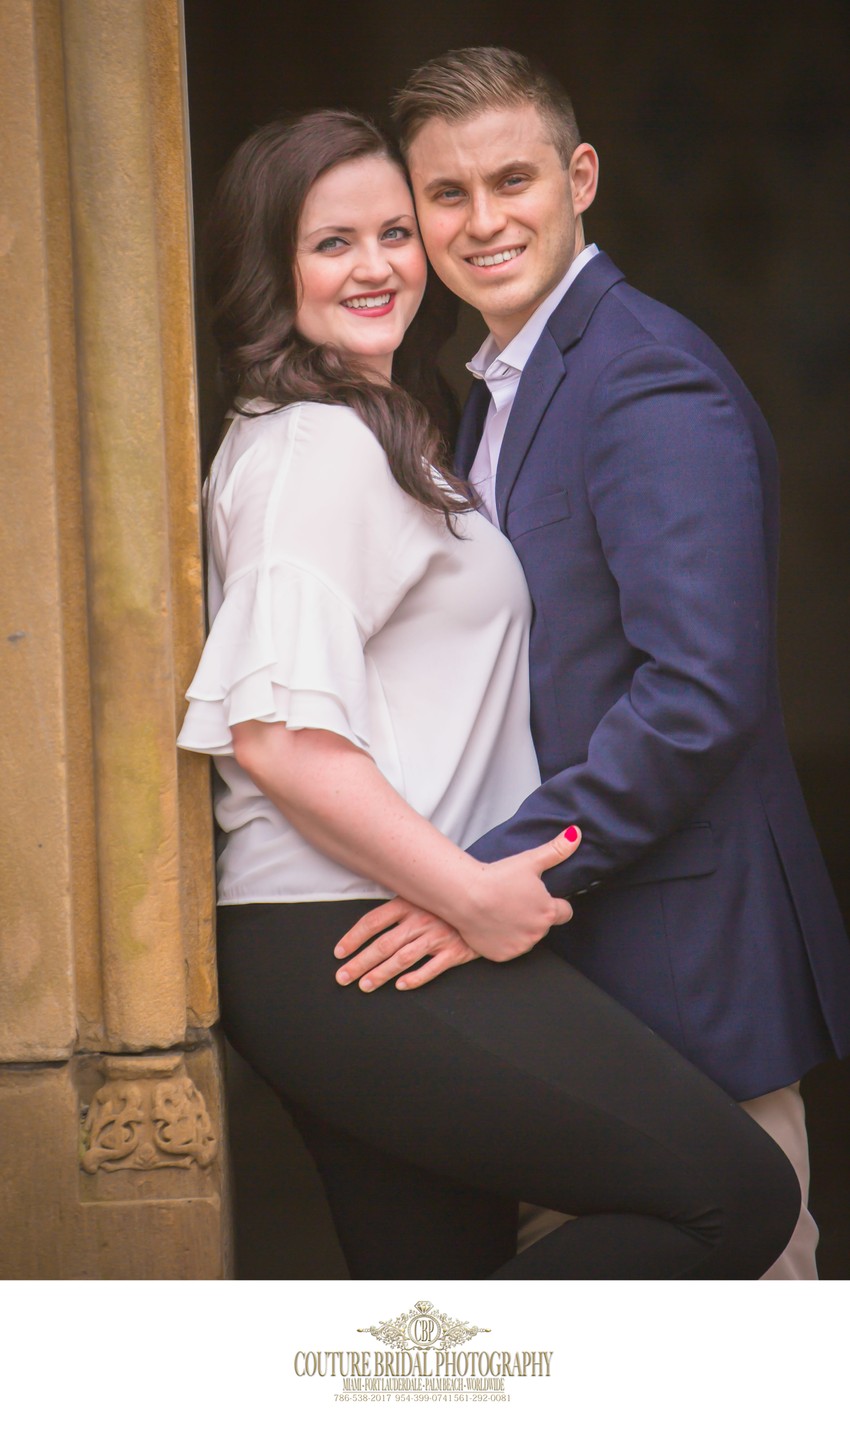 ENGAGEMENT PHOTOS FT LAUDERDALE PHOTOGRAPHER IN NYC